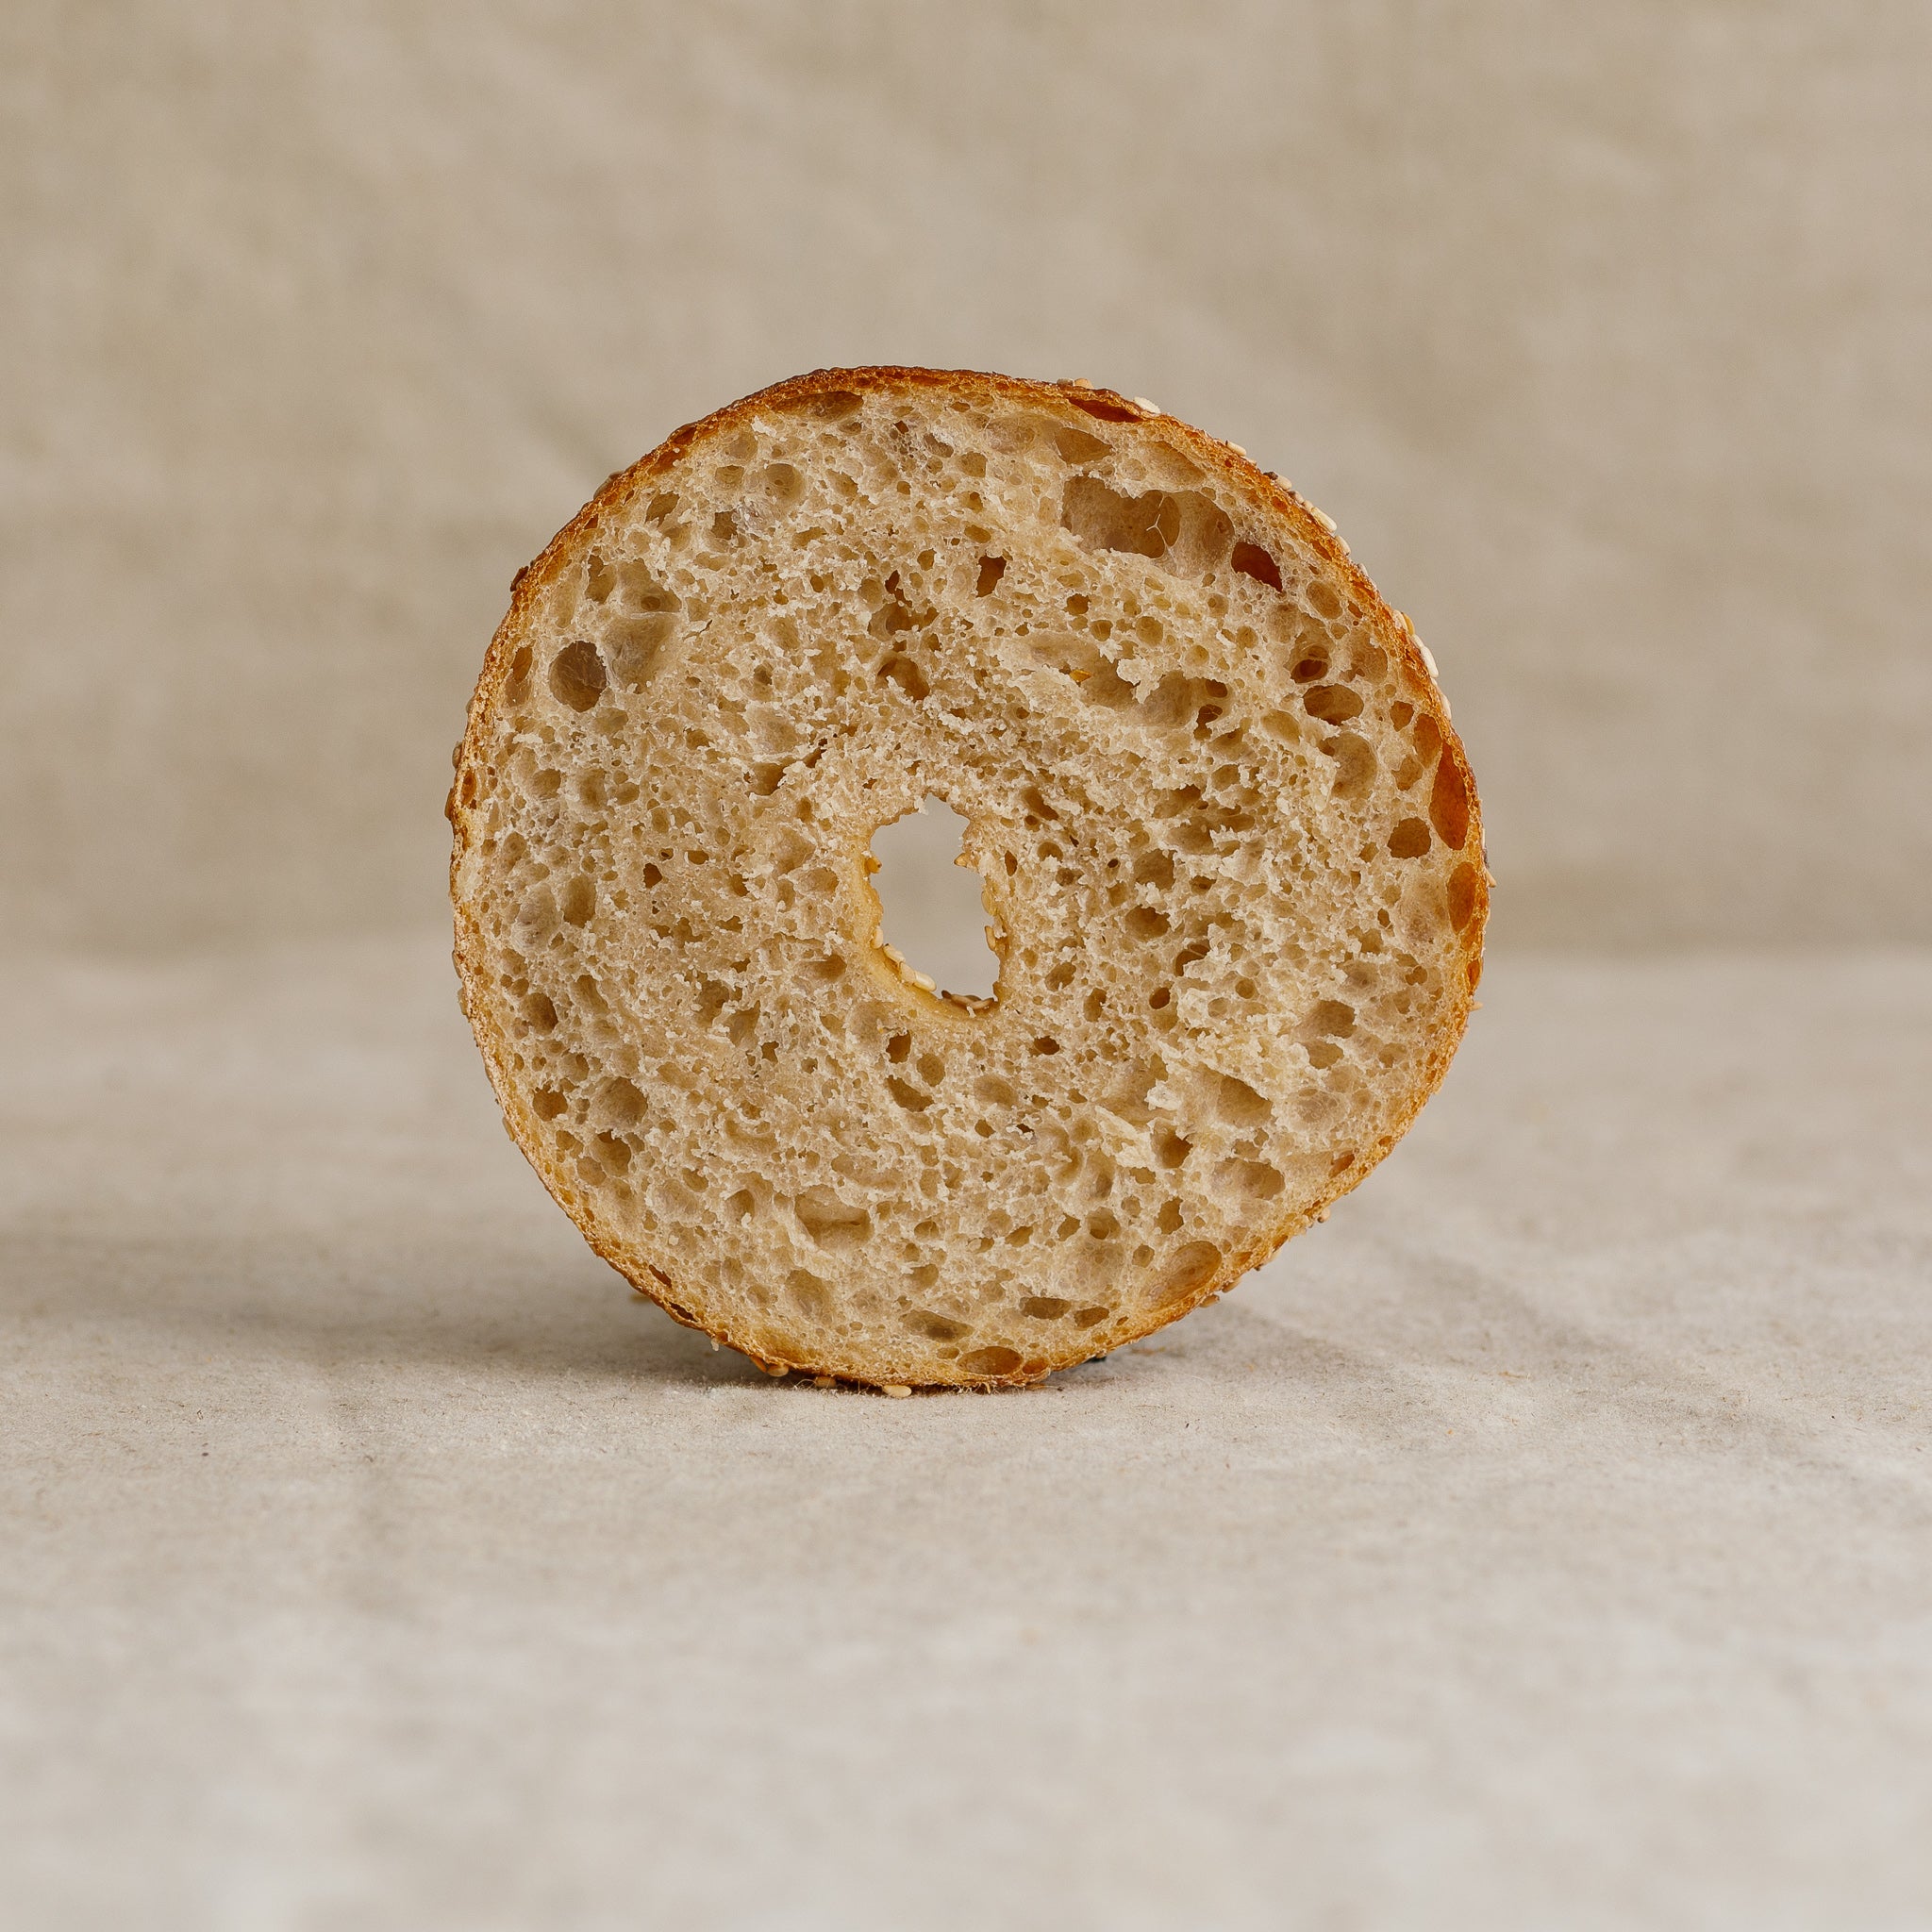 MONTREAL-STYLE SESAME BAGELS